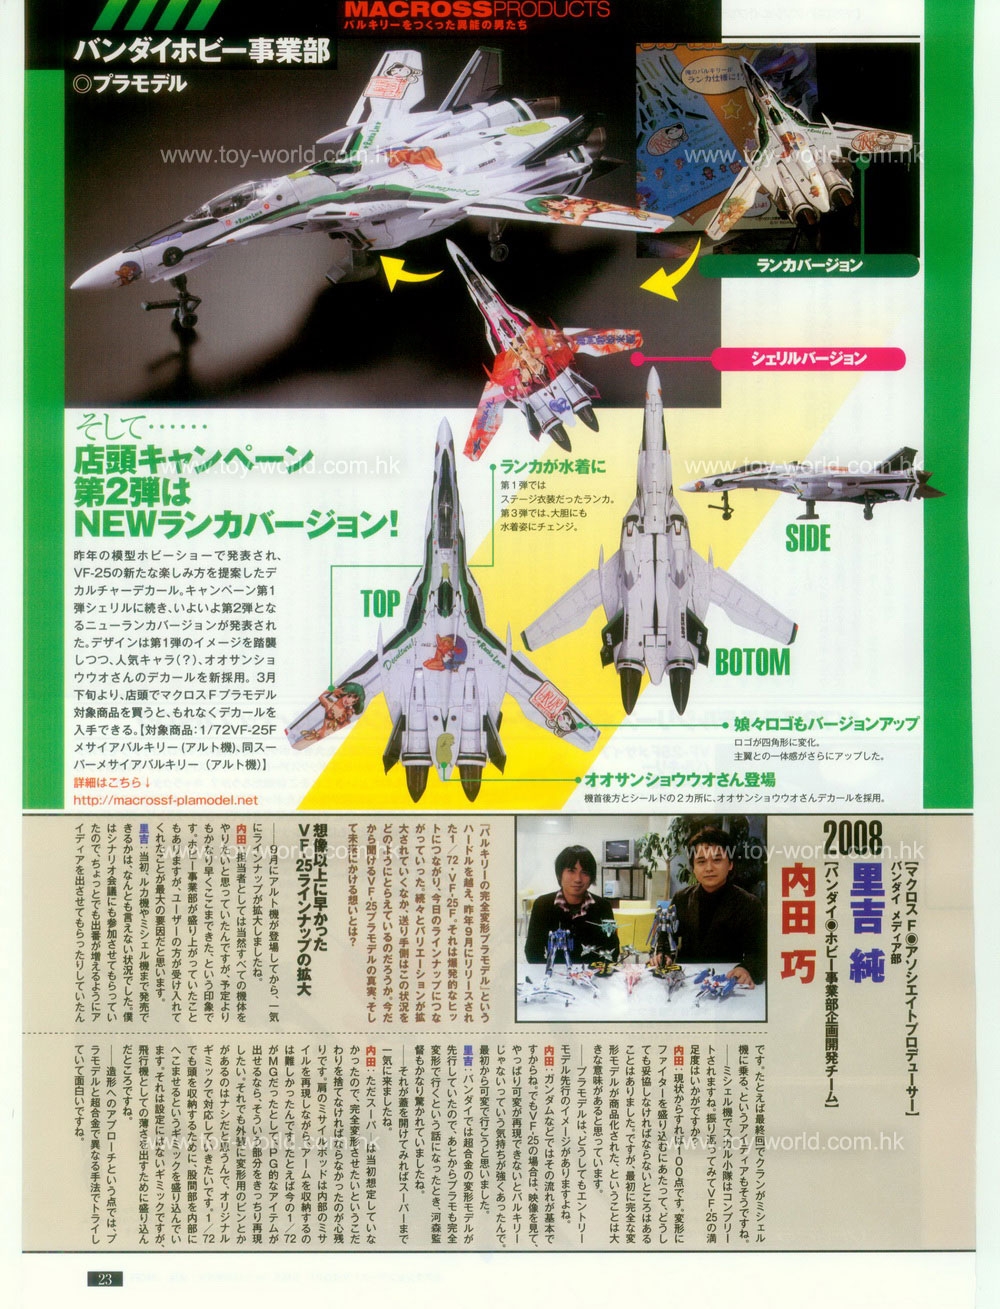 Figure OH No.134 - Special Feature: MACROSS Products 21